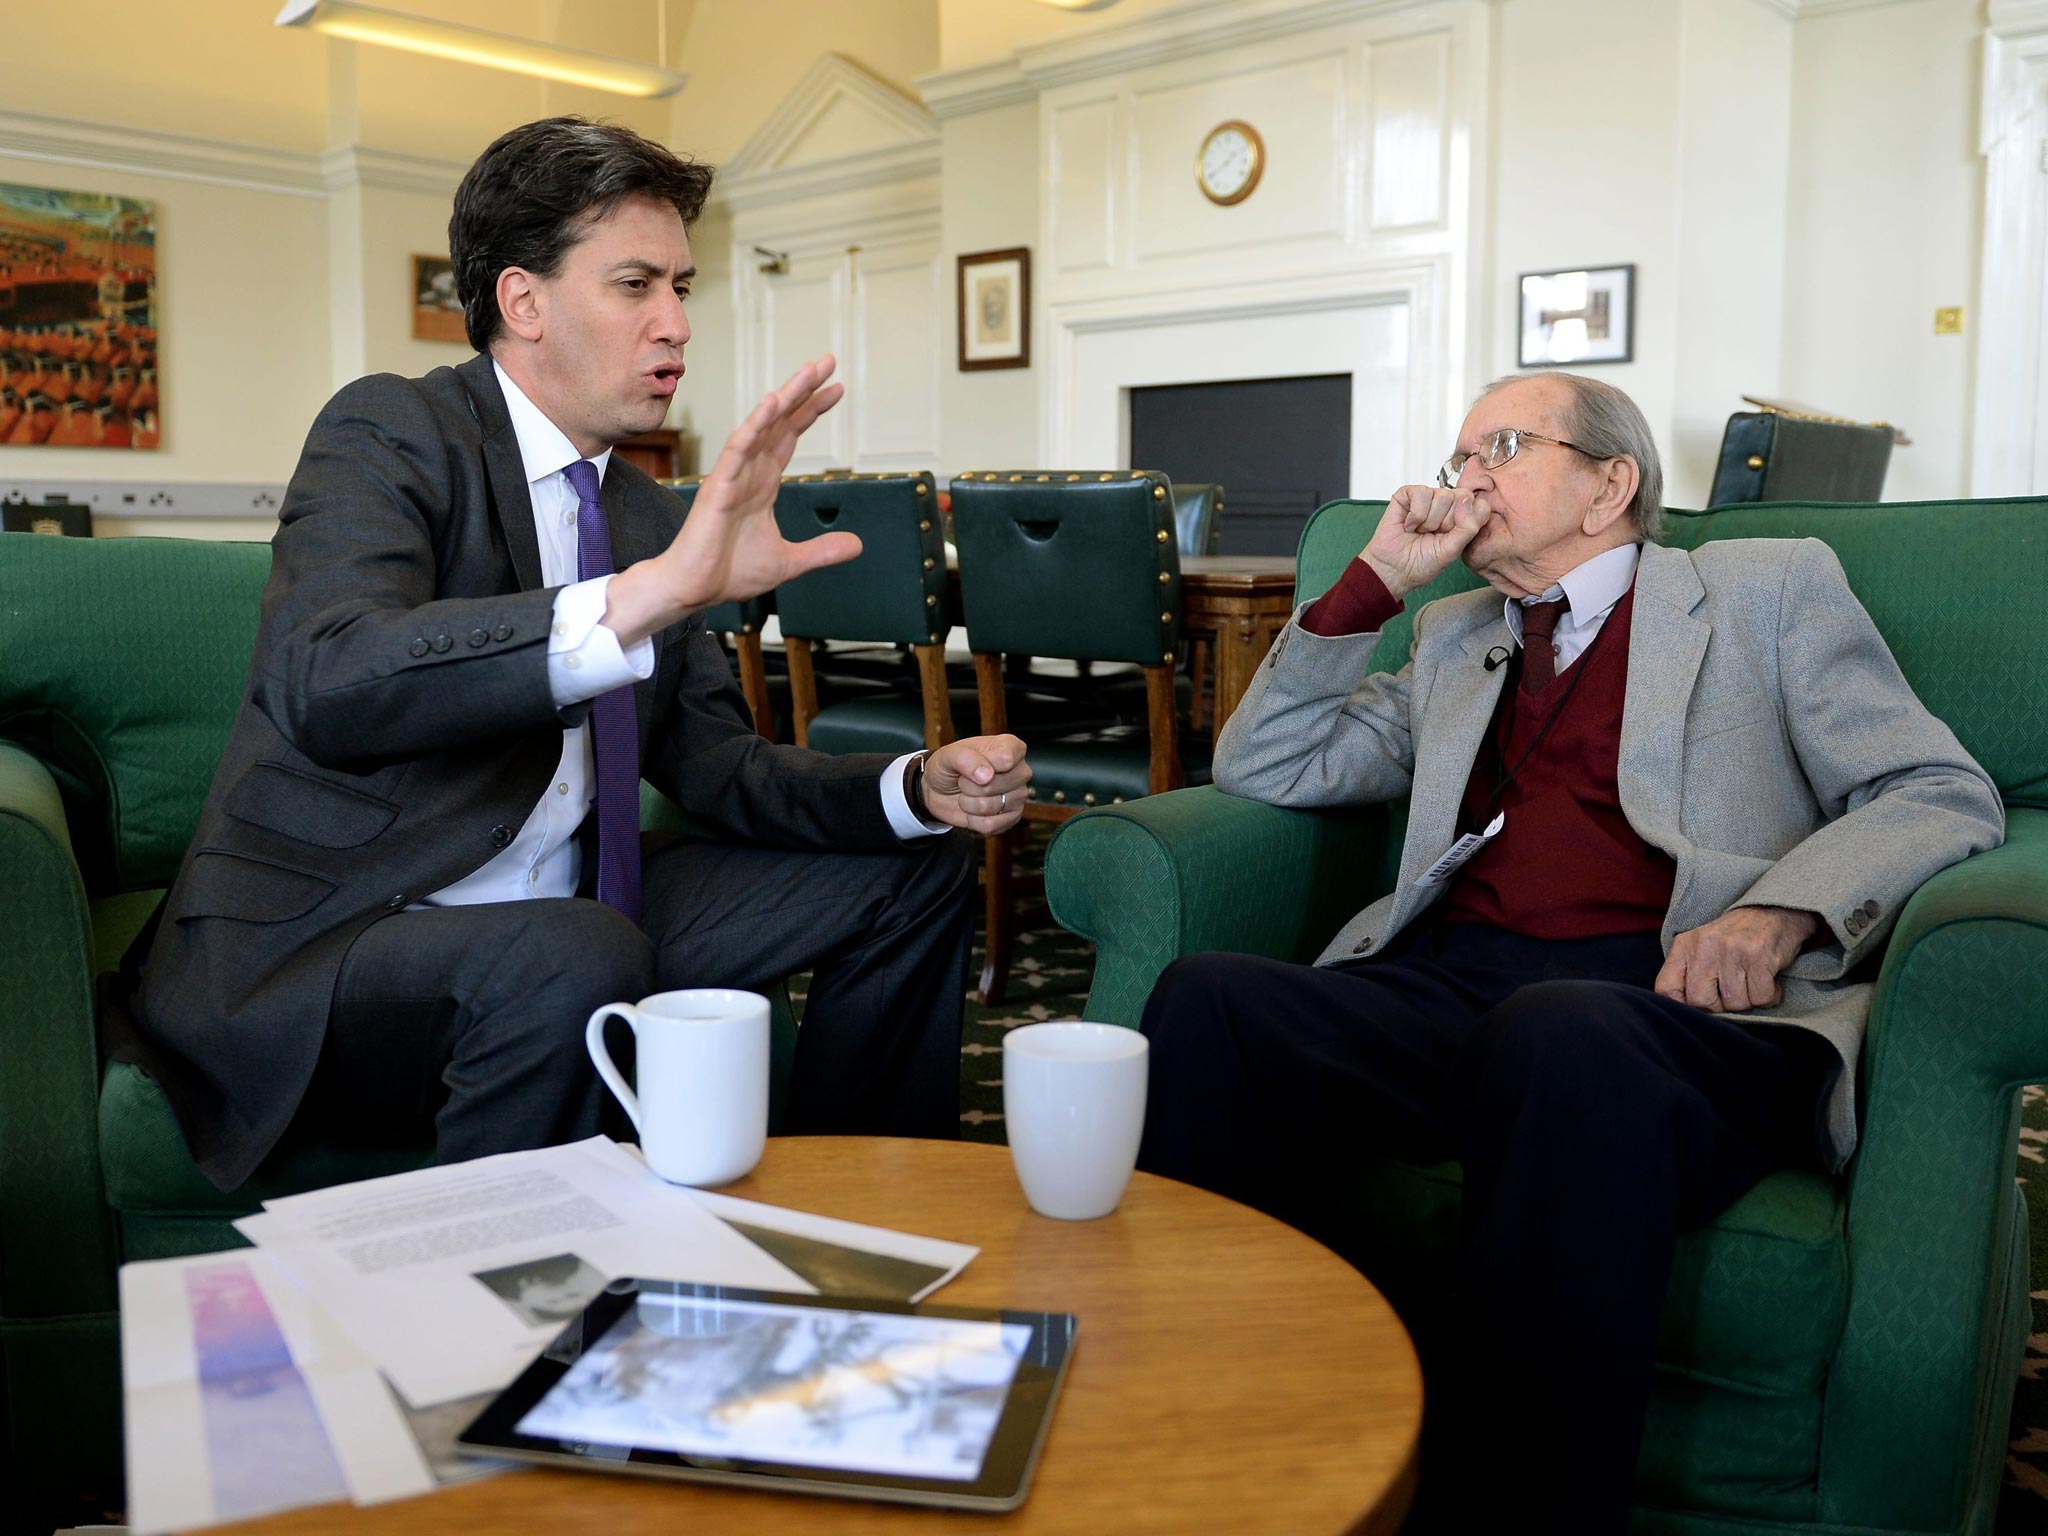 Labour leader Ed Miliband meets D-Day Veteran Mark Radley, 89, who served with his father Ralph on HMS Hilary during the Second World War